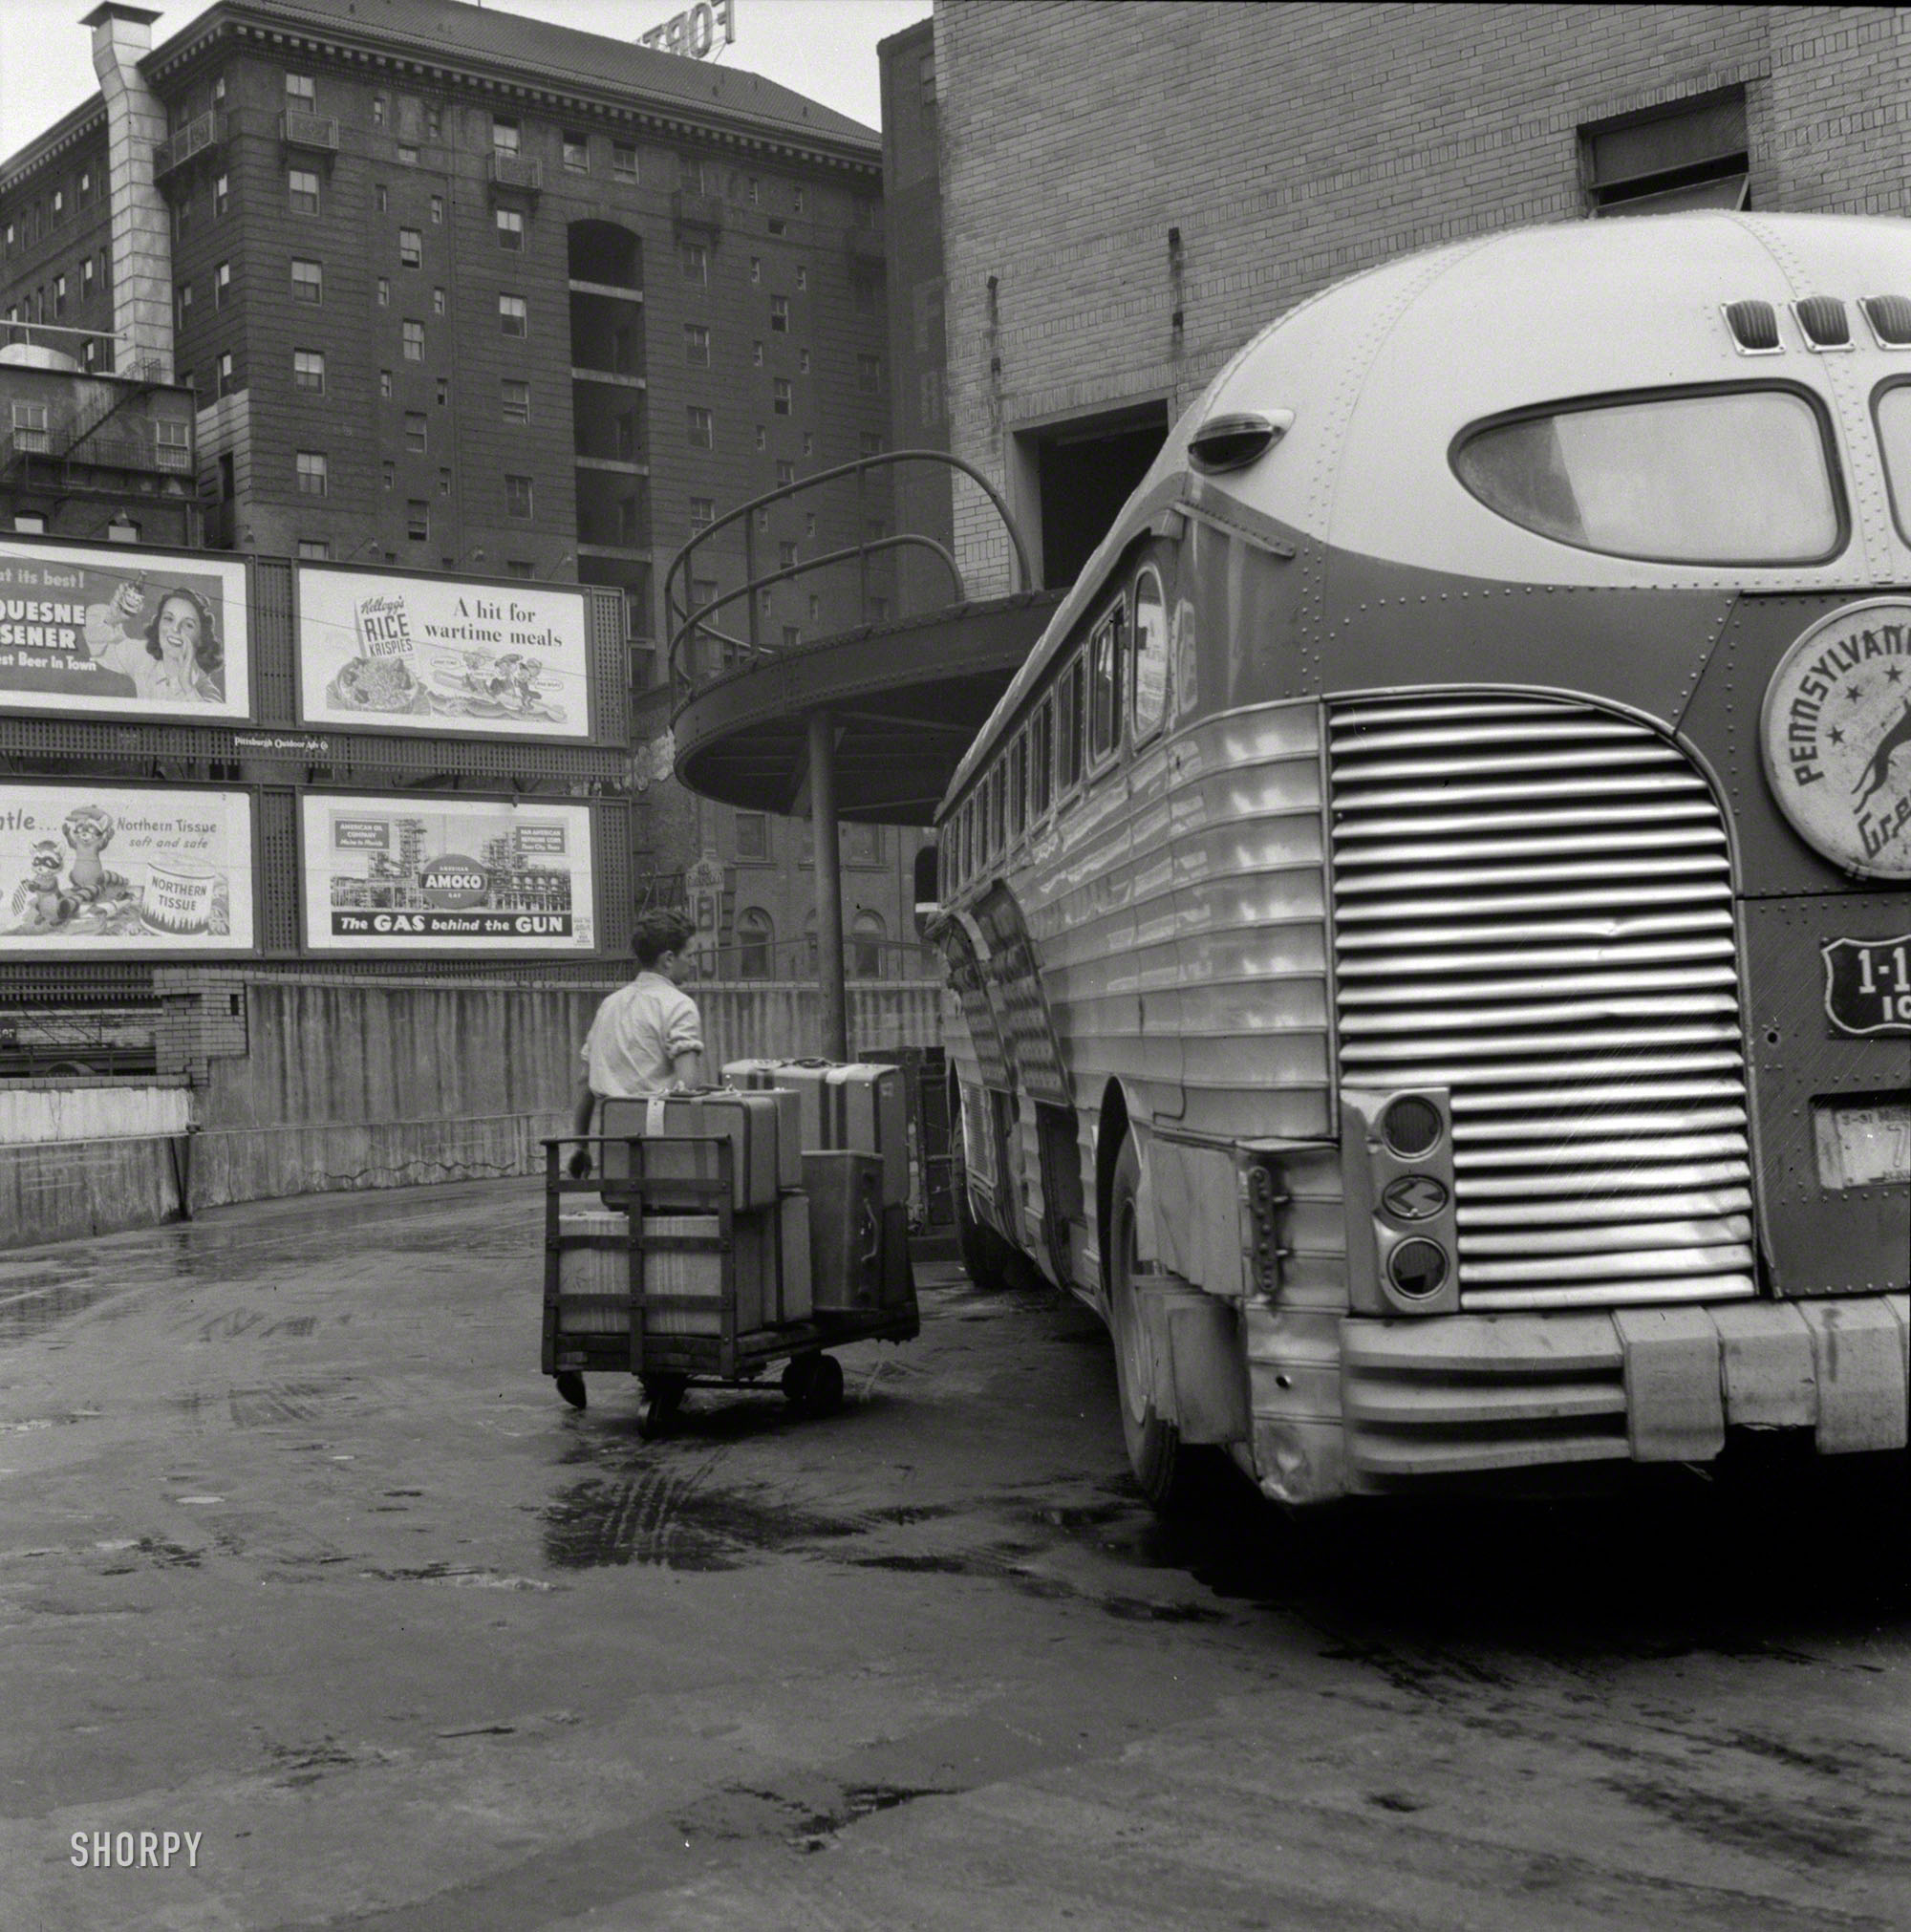 September 1943. "Pittsburgh, Pennsylvania. Bringing baggage from a bus." Photo by Esther Bubley for the Office of War Information. View full size.